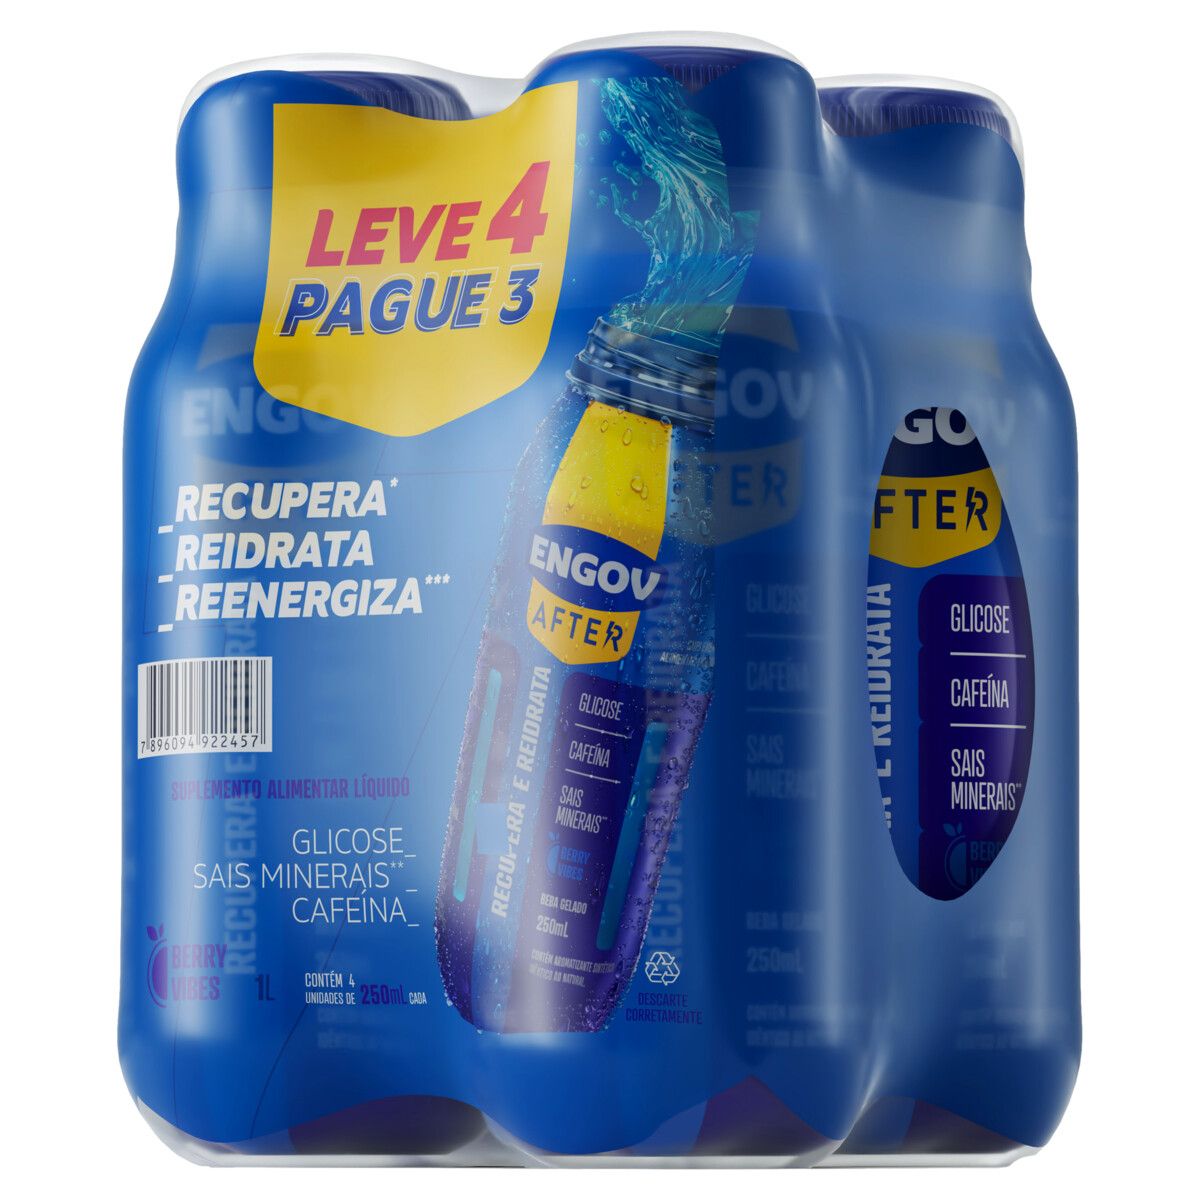 Engov After Berry Vibes 250ml Cada Leve 4 Pague 3 Unidades image number 1